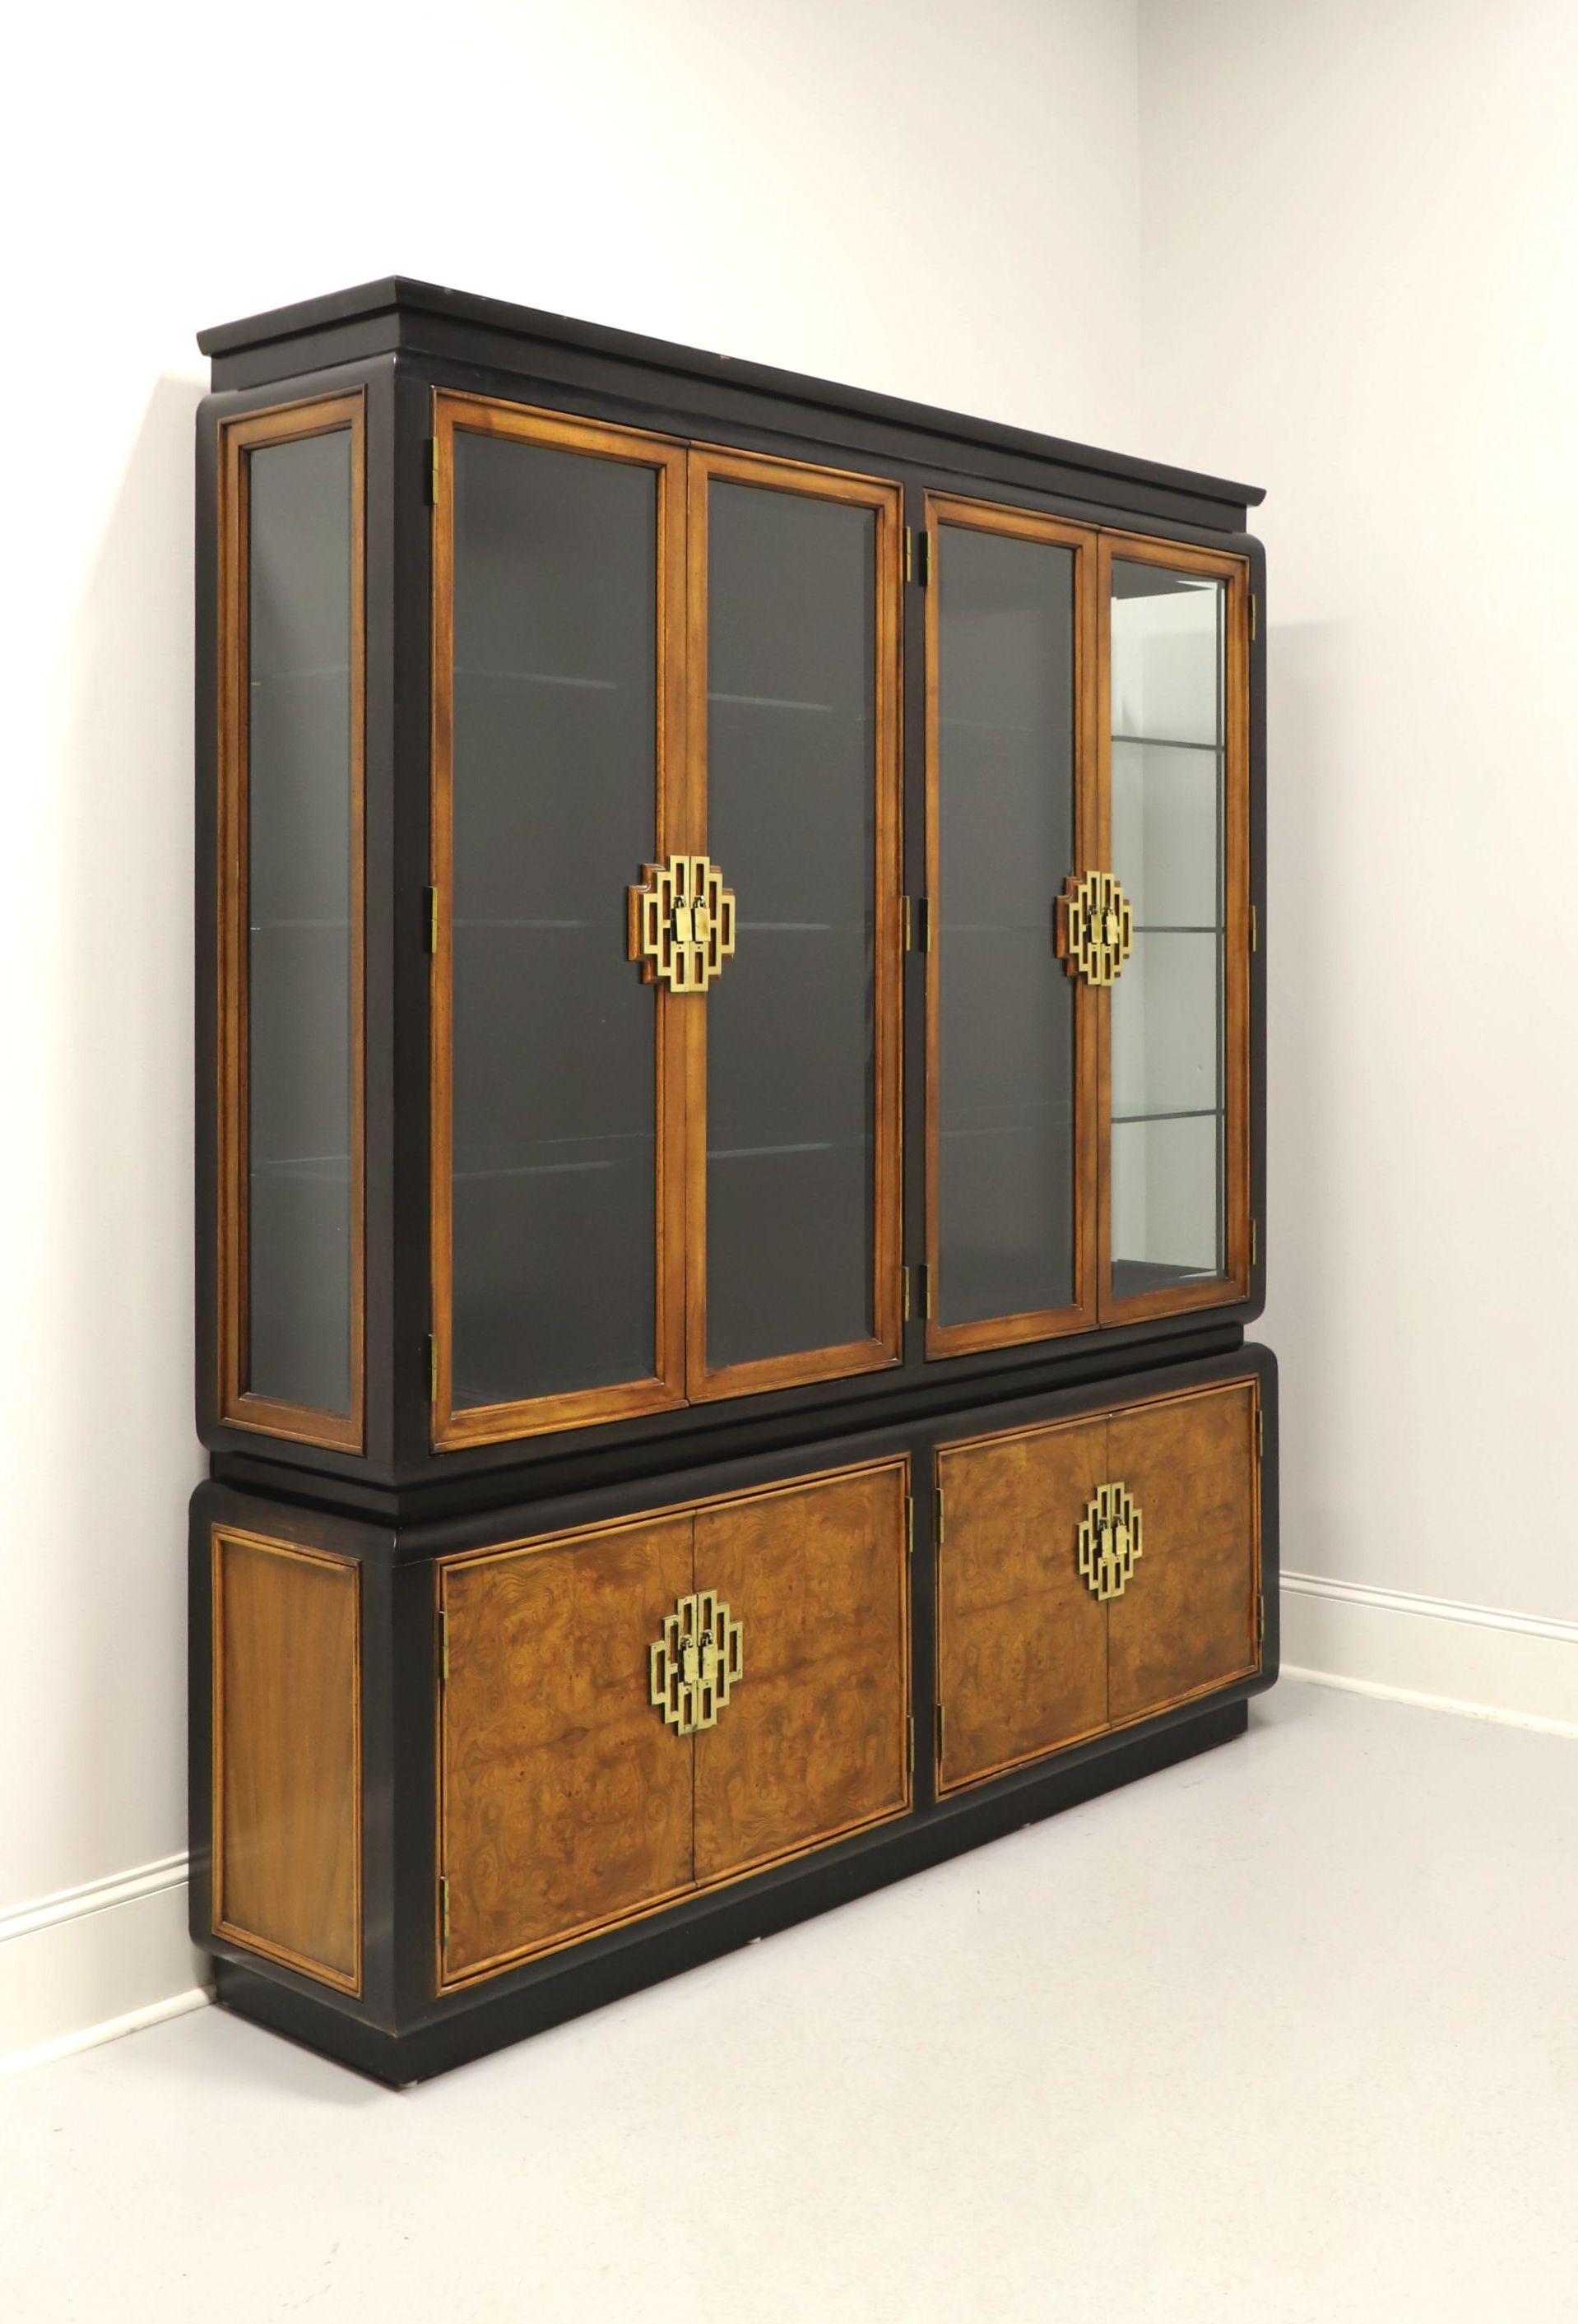 An Asian style dual china display cabinet by high-quality furniture maker Century Furniture, from their 